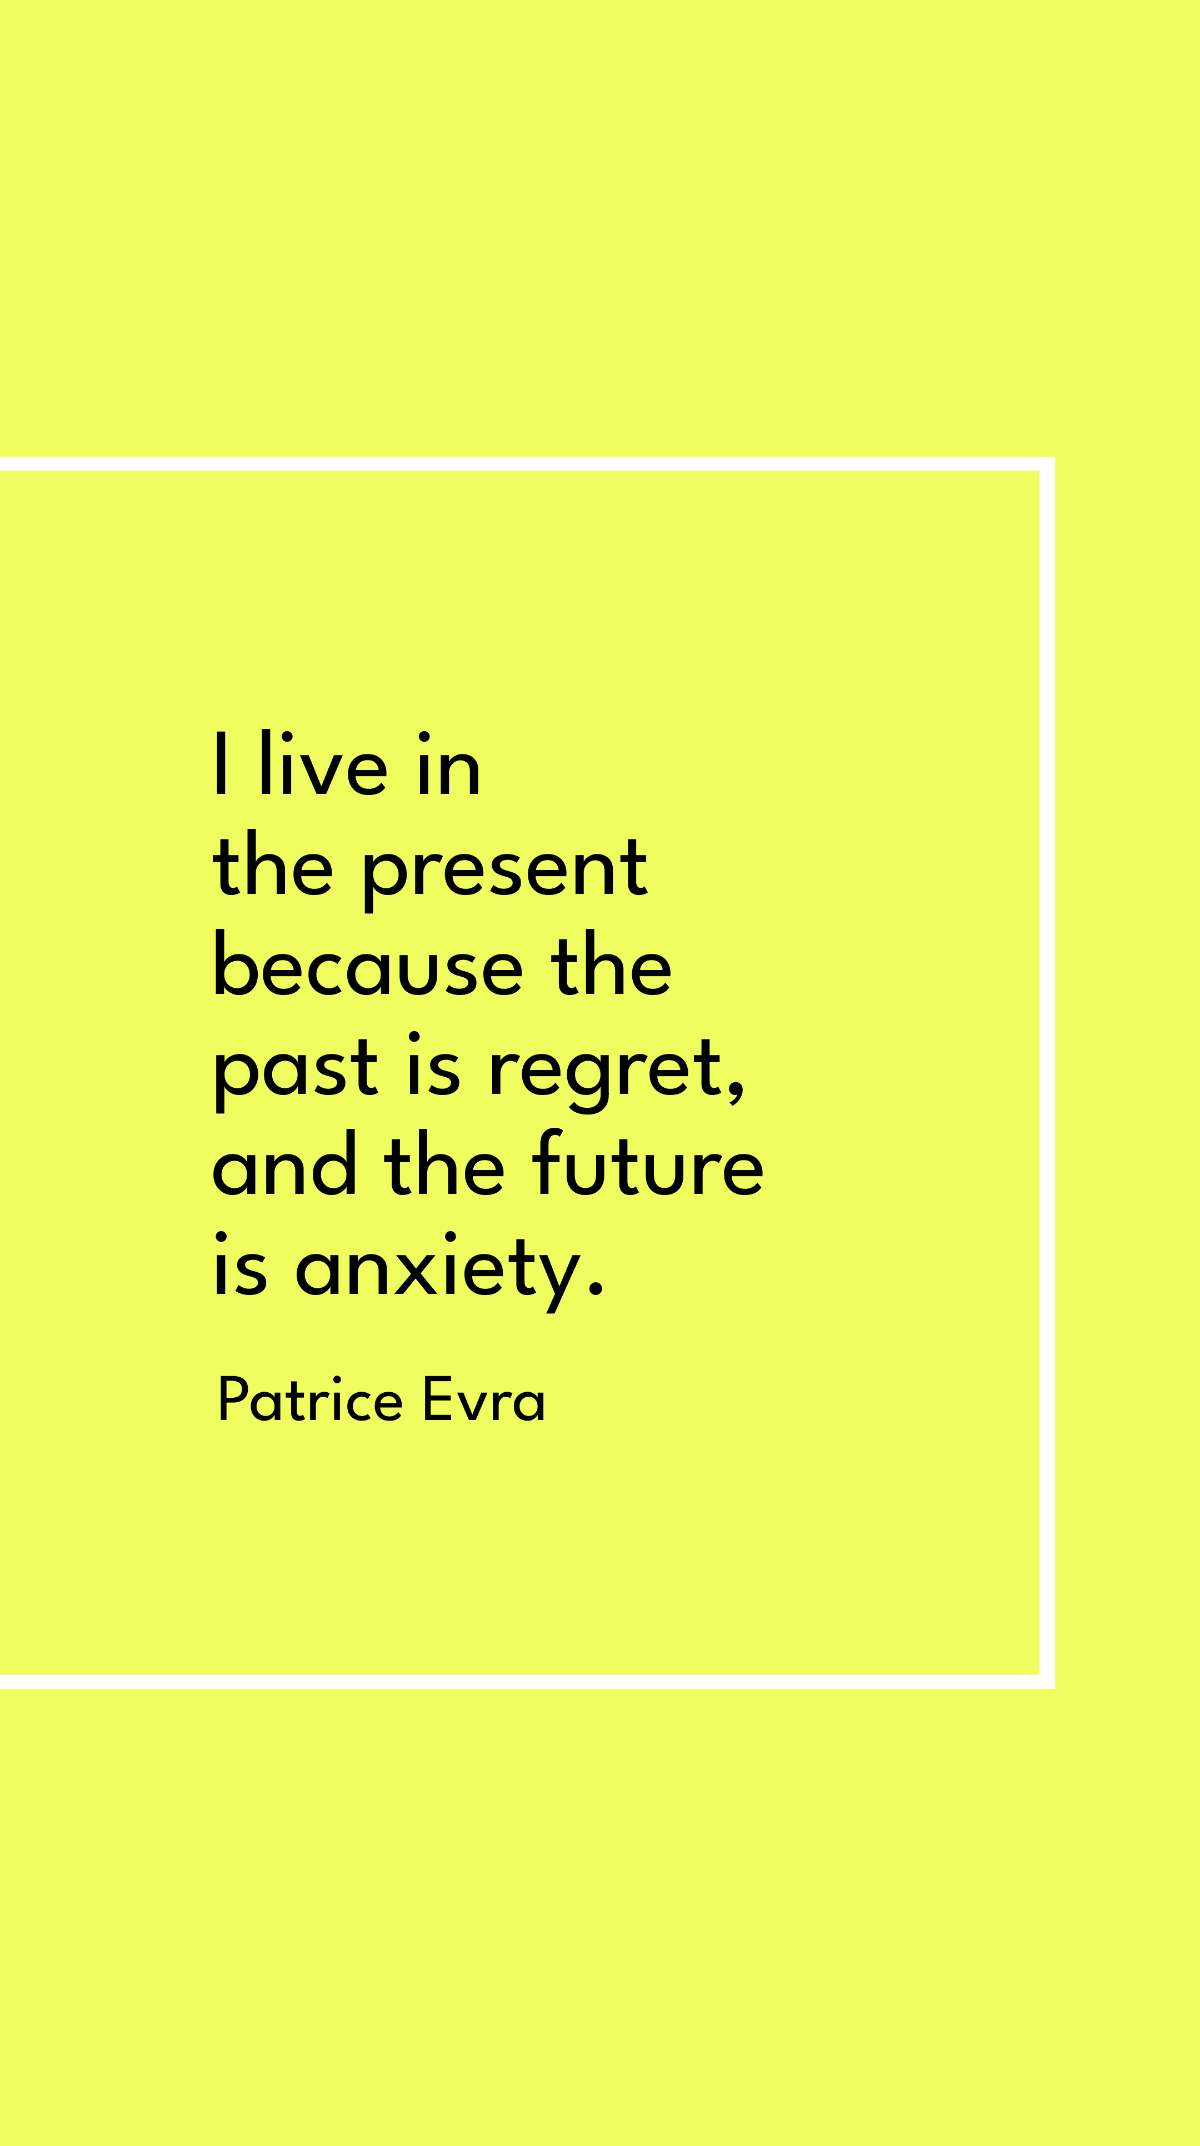 Patrice Evra - I live in the present because the past is regret, and the future is anxiety. Template